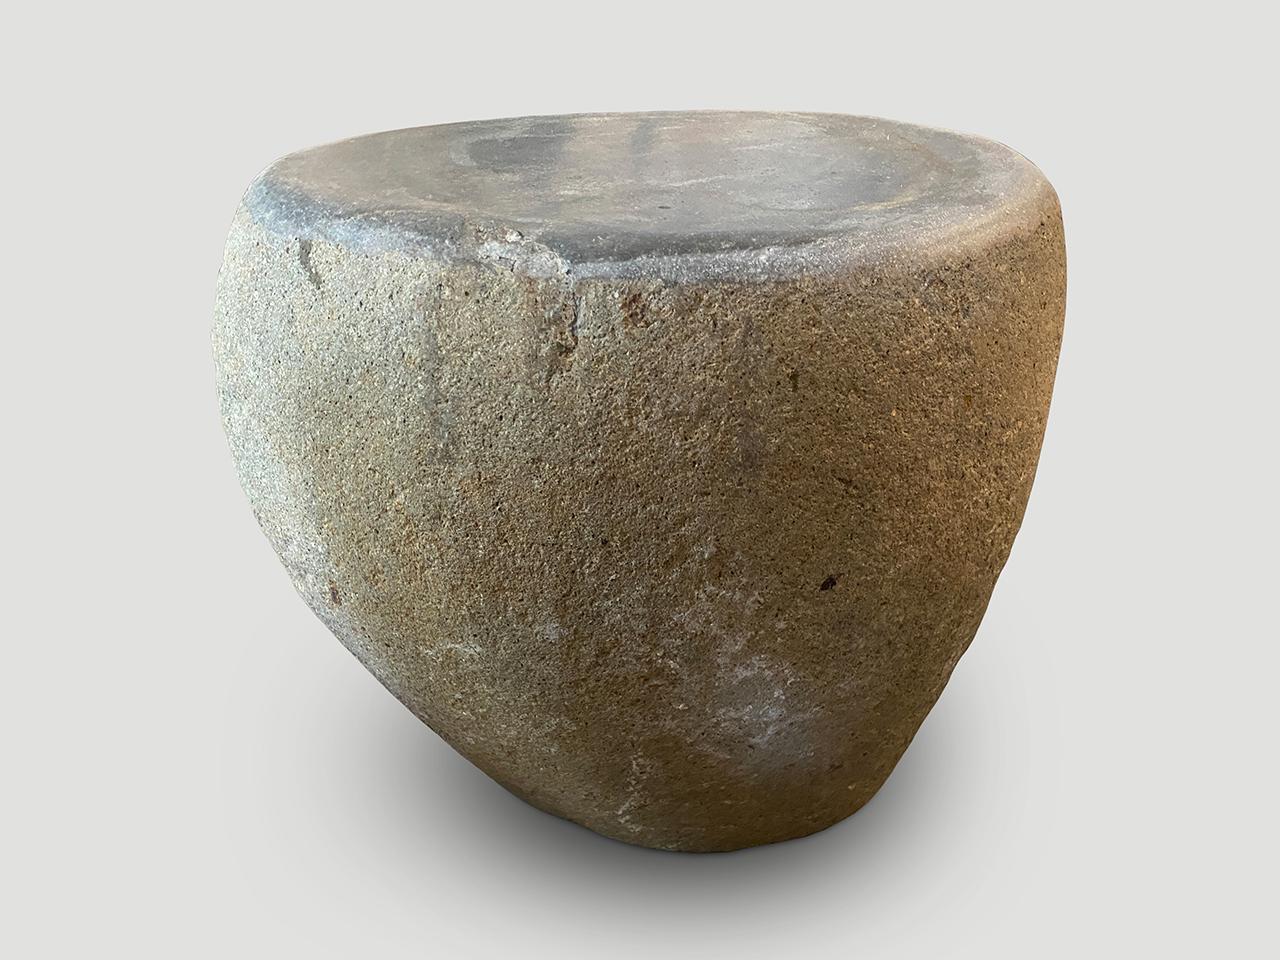 Wabi Sabi river stone side table with a graduation from the bottom to the top. We have polished the top revealing the natural grey tone.

This side table was sourced in the spirit of Wabi-Sabi, a Japanese philosophy that beauty can be found in